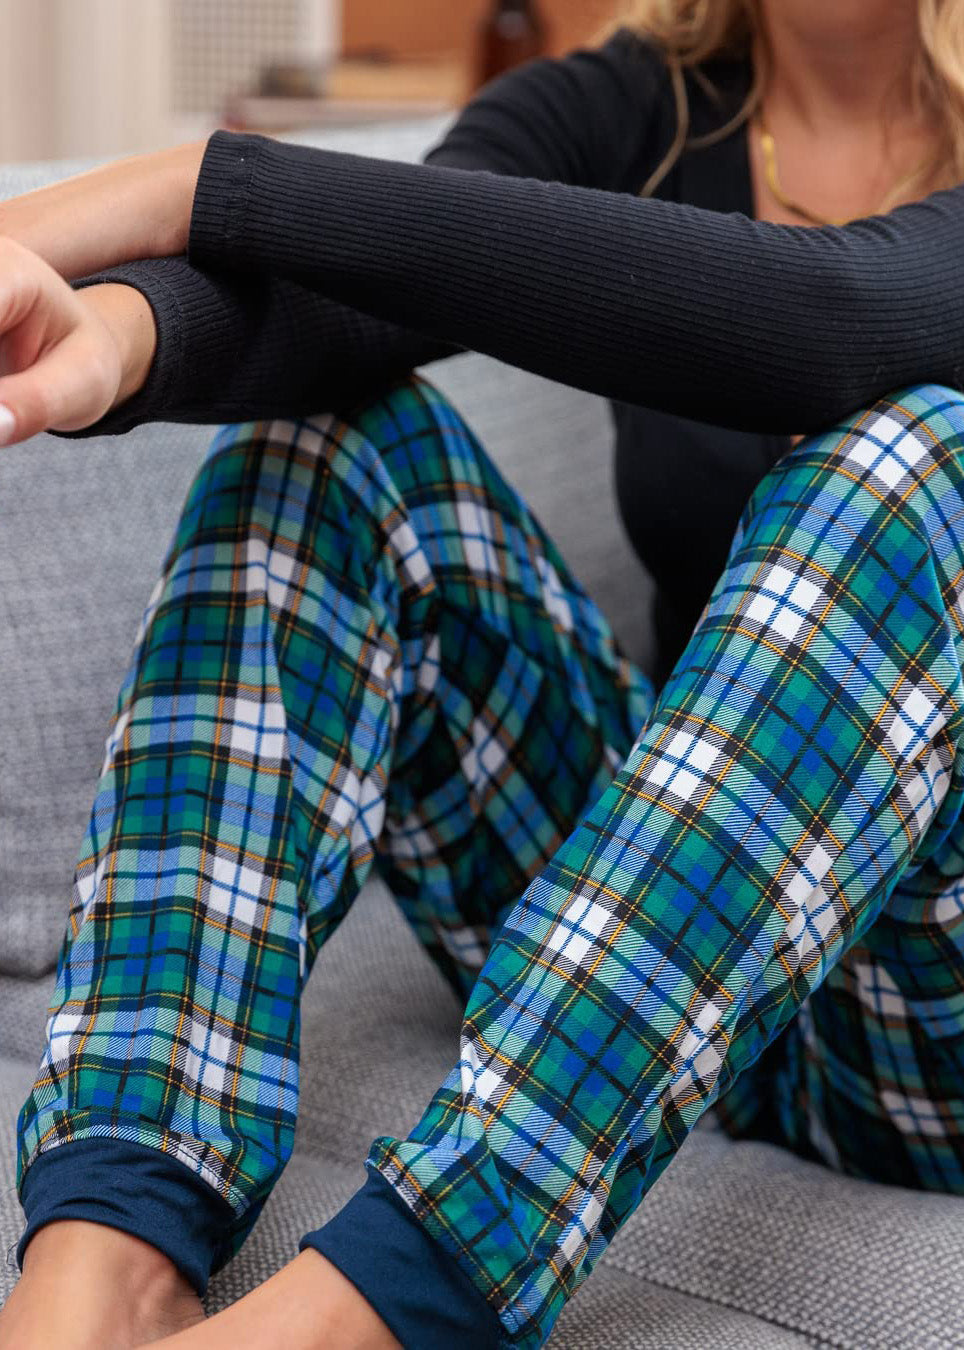 PJ joggers with soft velvety texture, stretch, elastic waistband, drawstring, and stylish ankle cuff. This pattern is a blue, green and gold tartan.